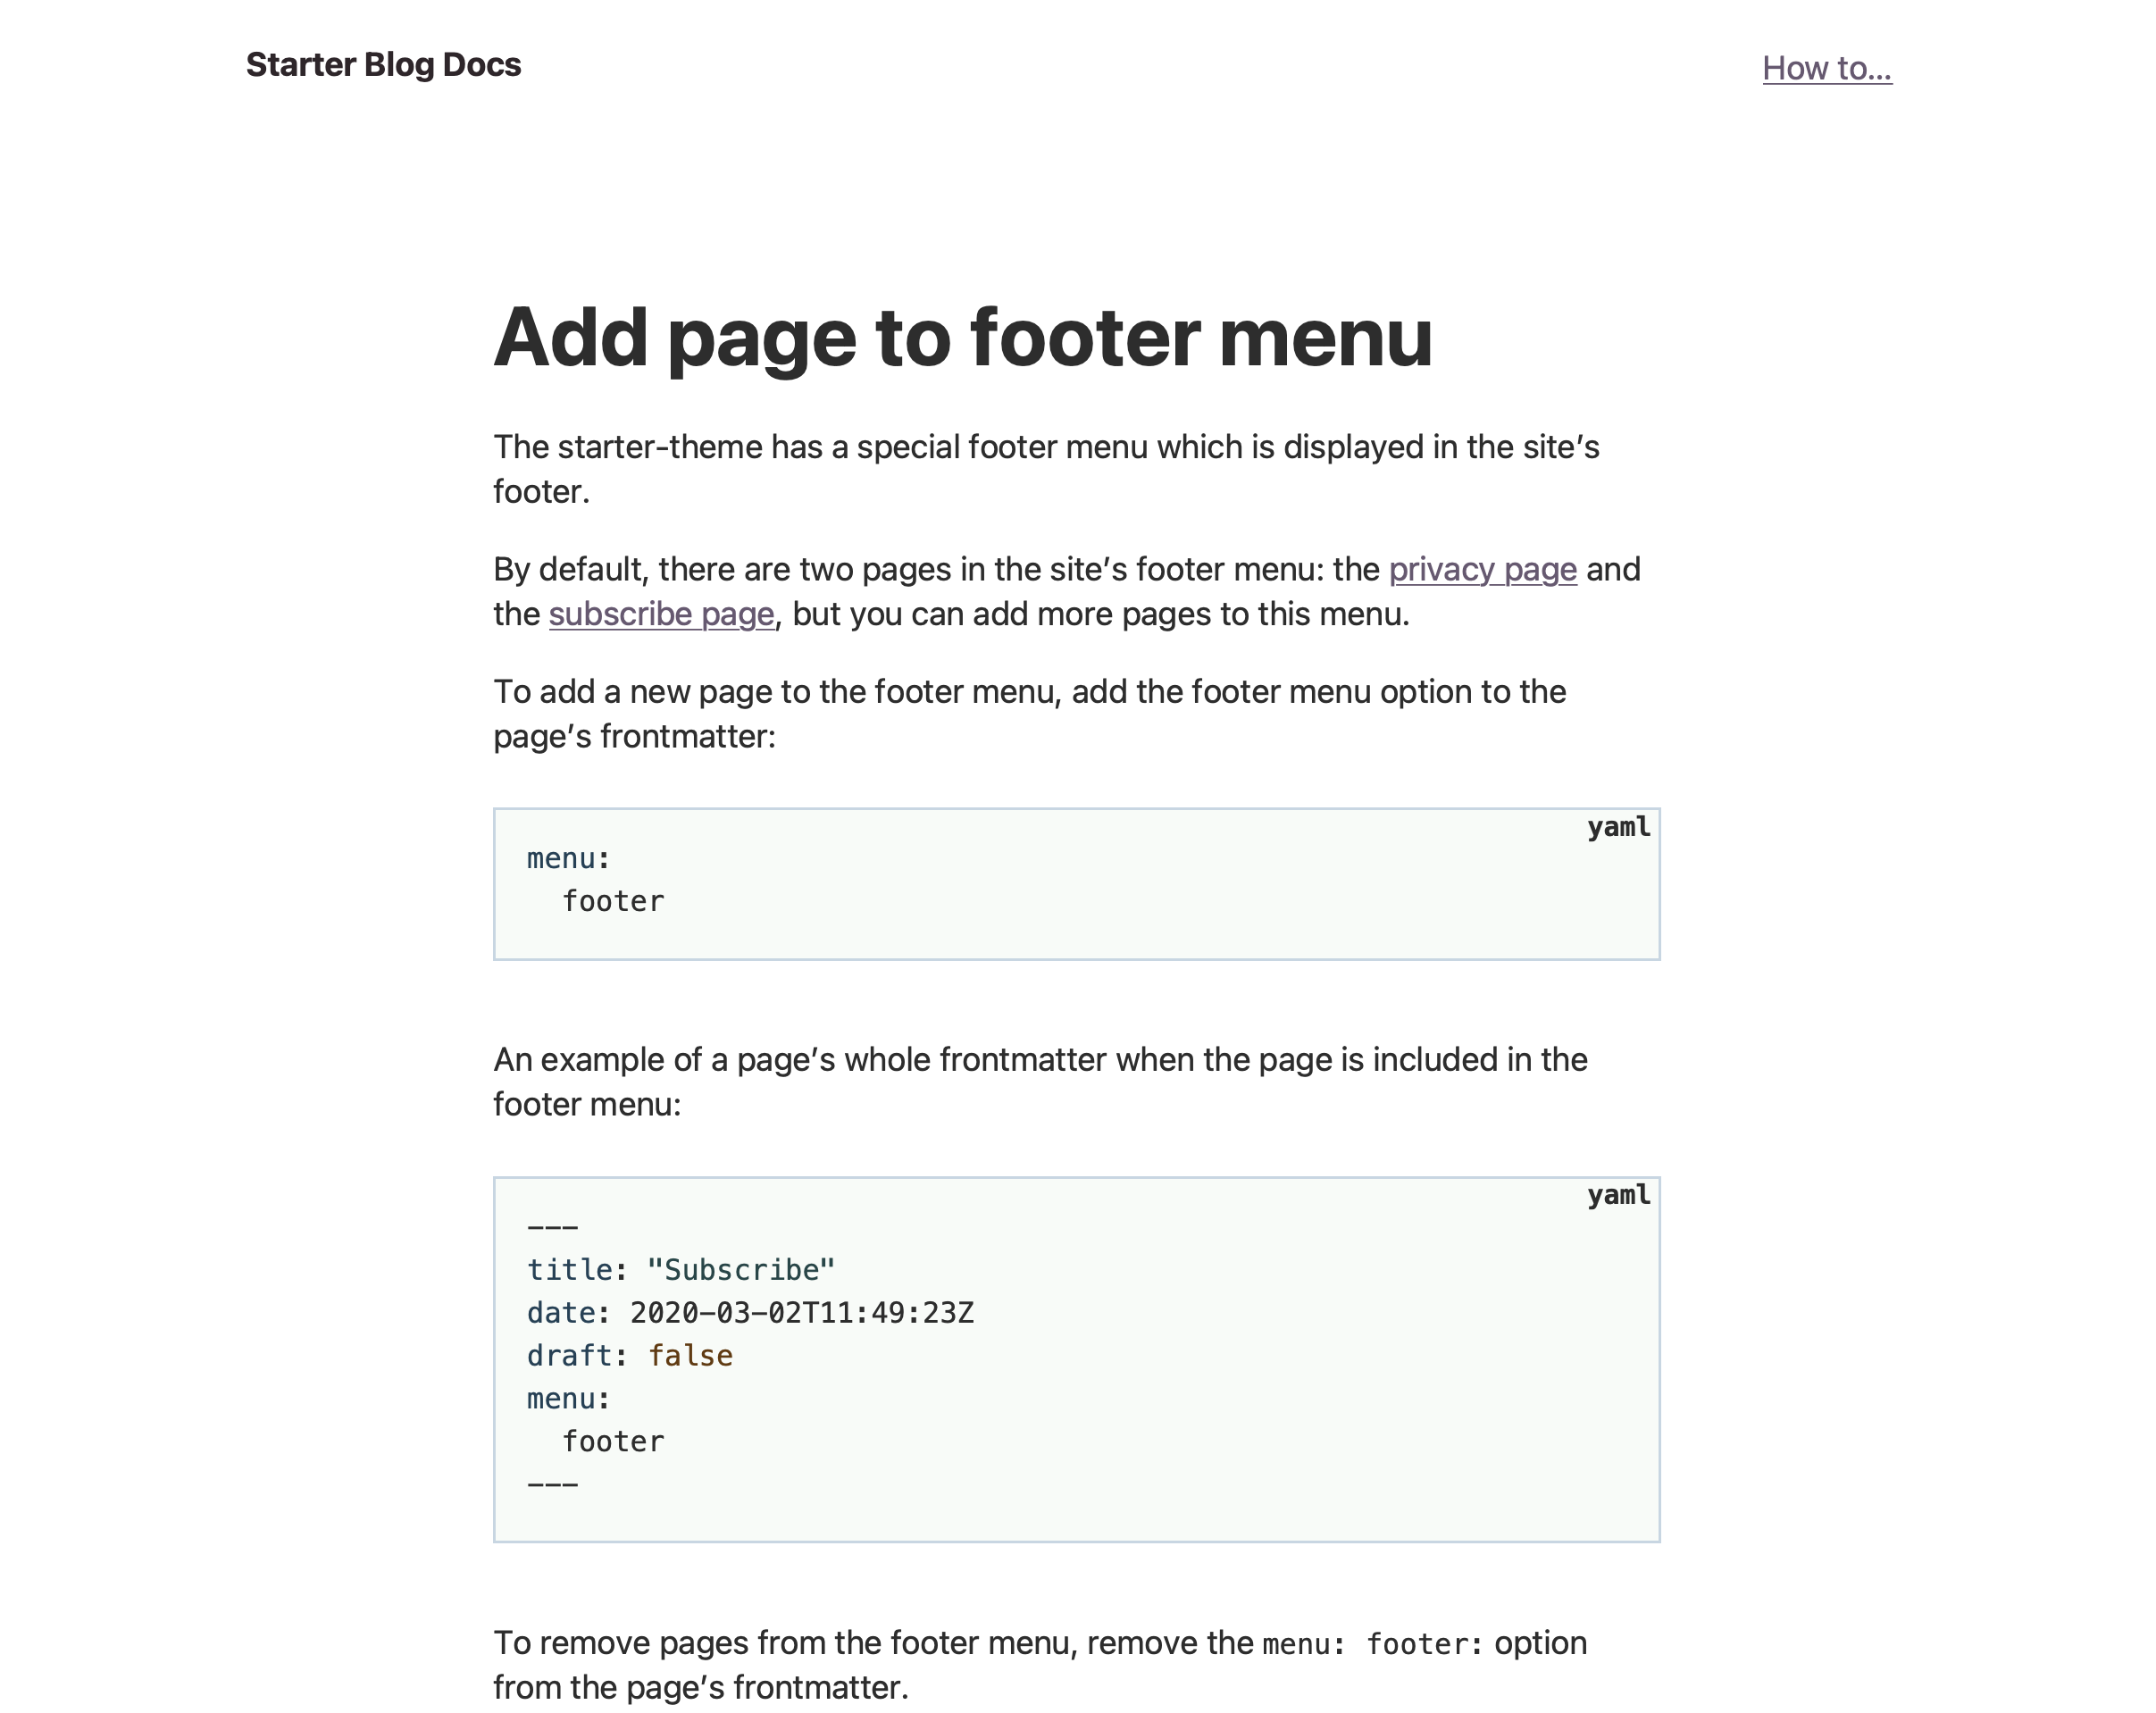 Minimal blog page showing documentation on how to add page to footer menu.